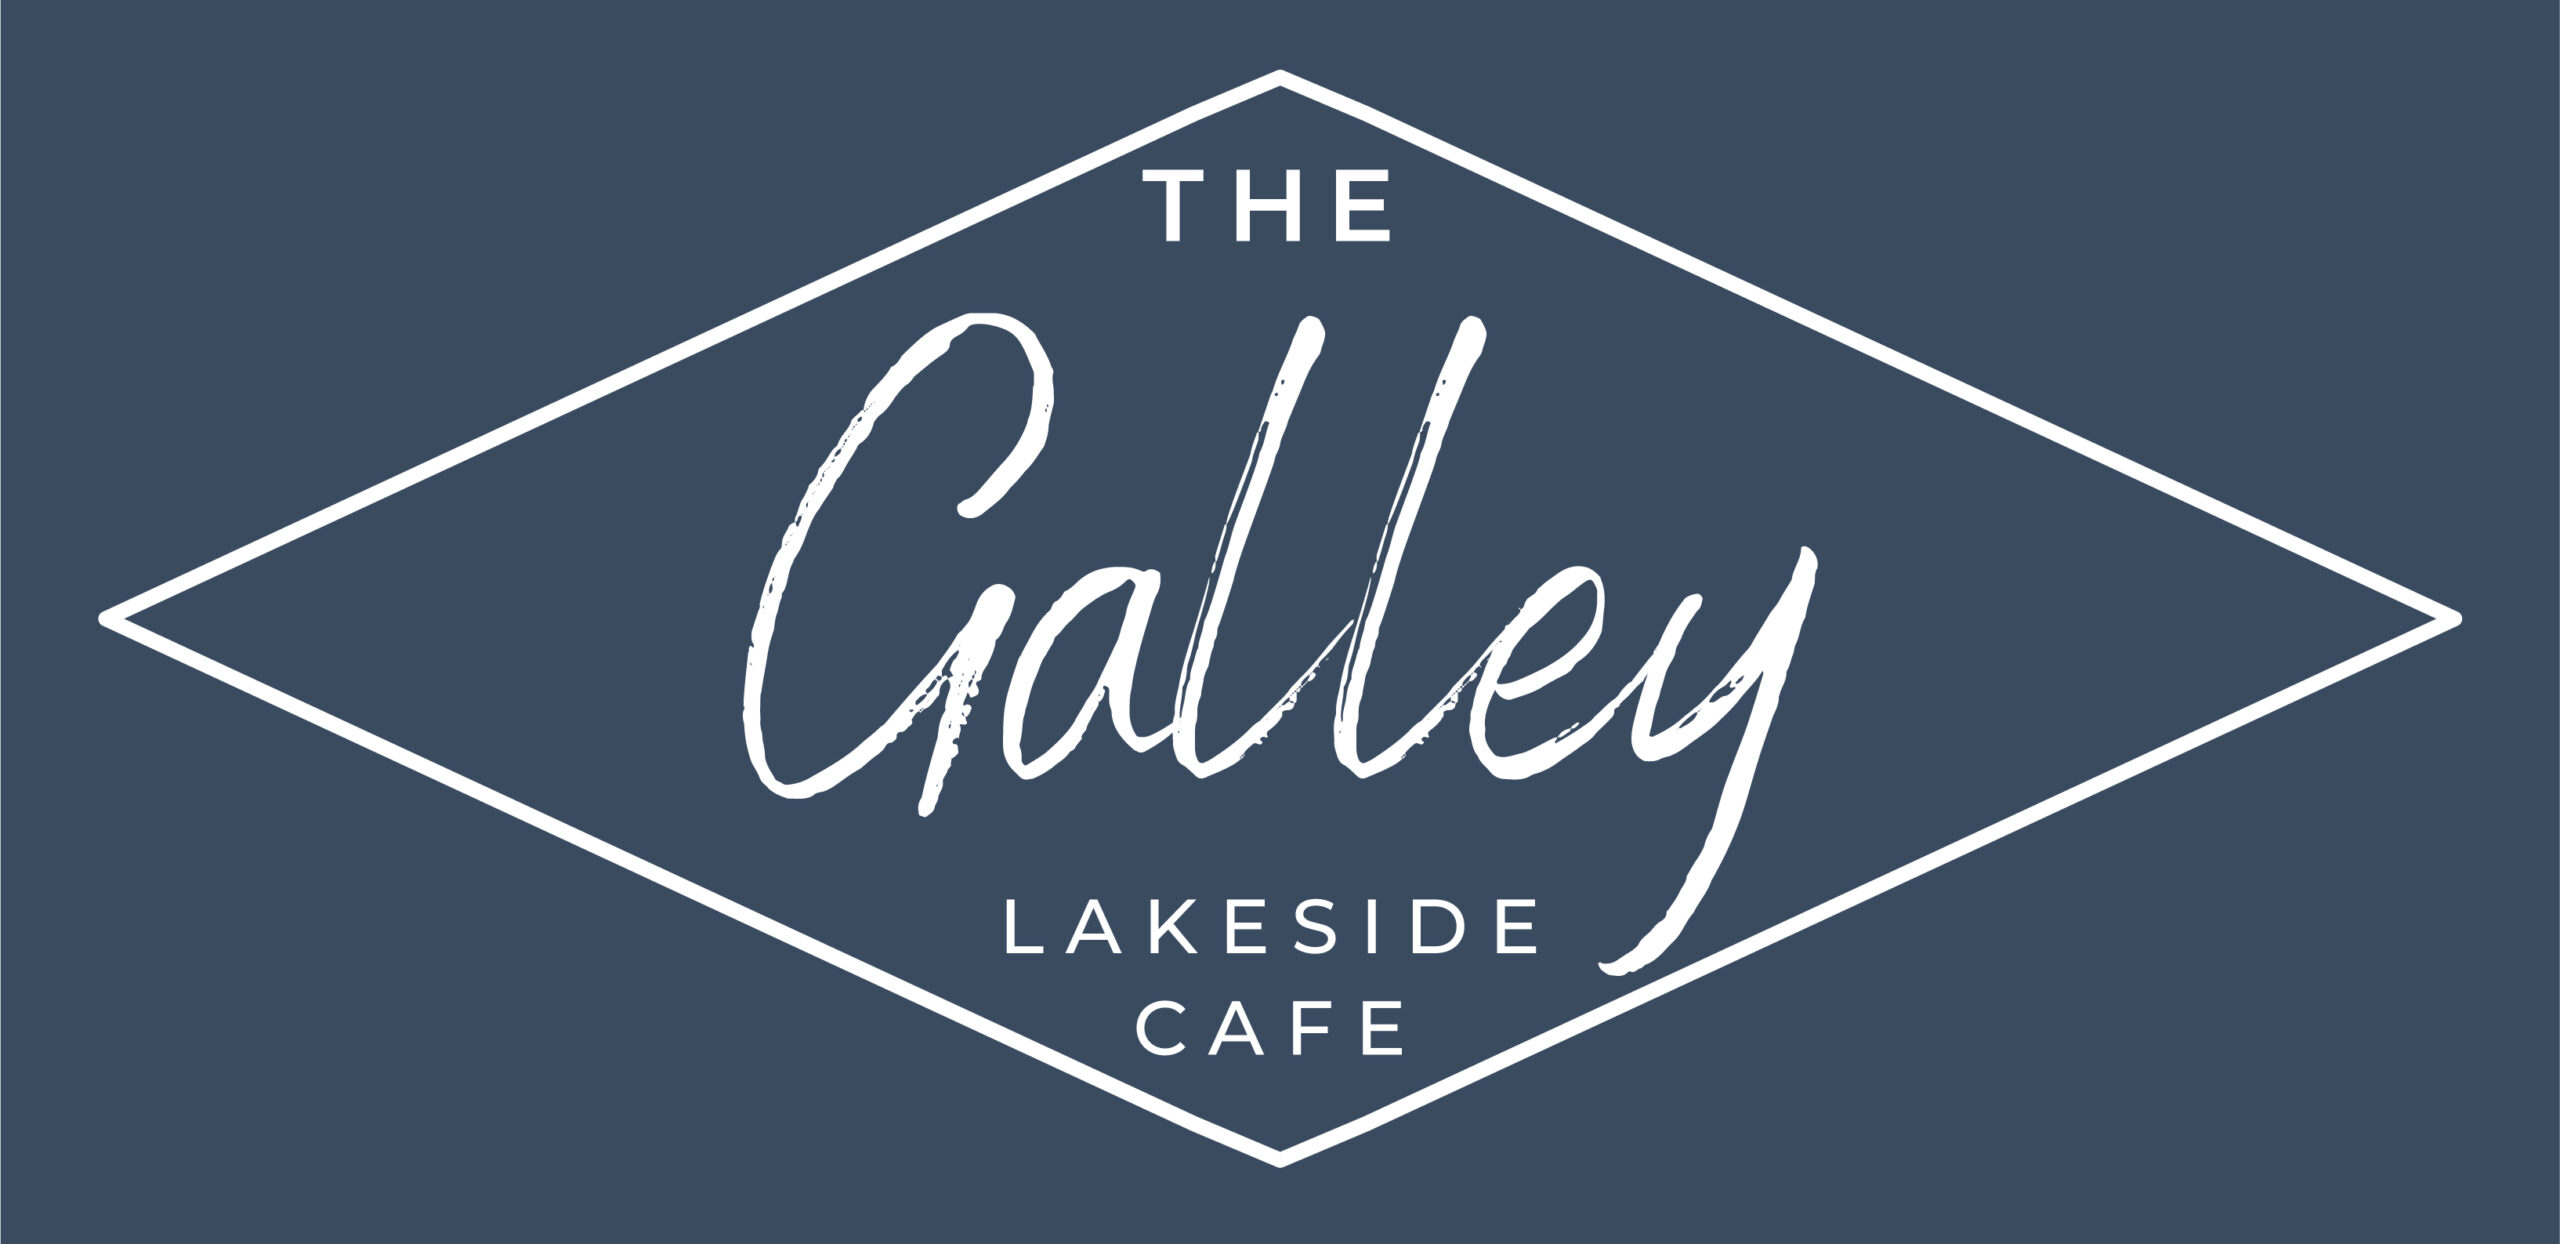 the galley cafe